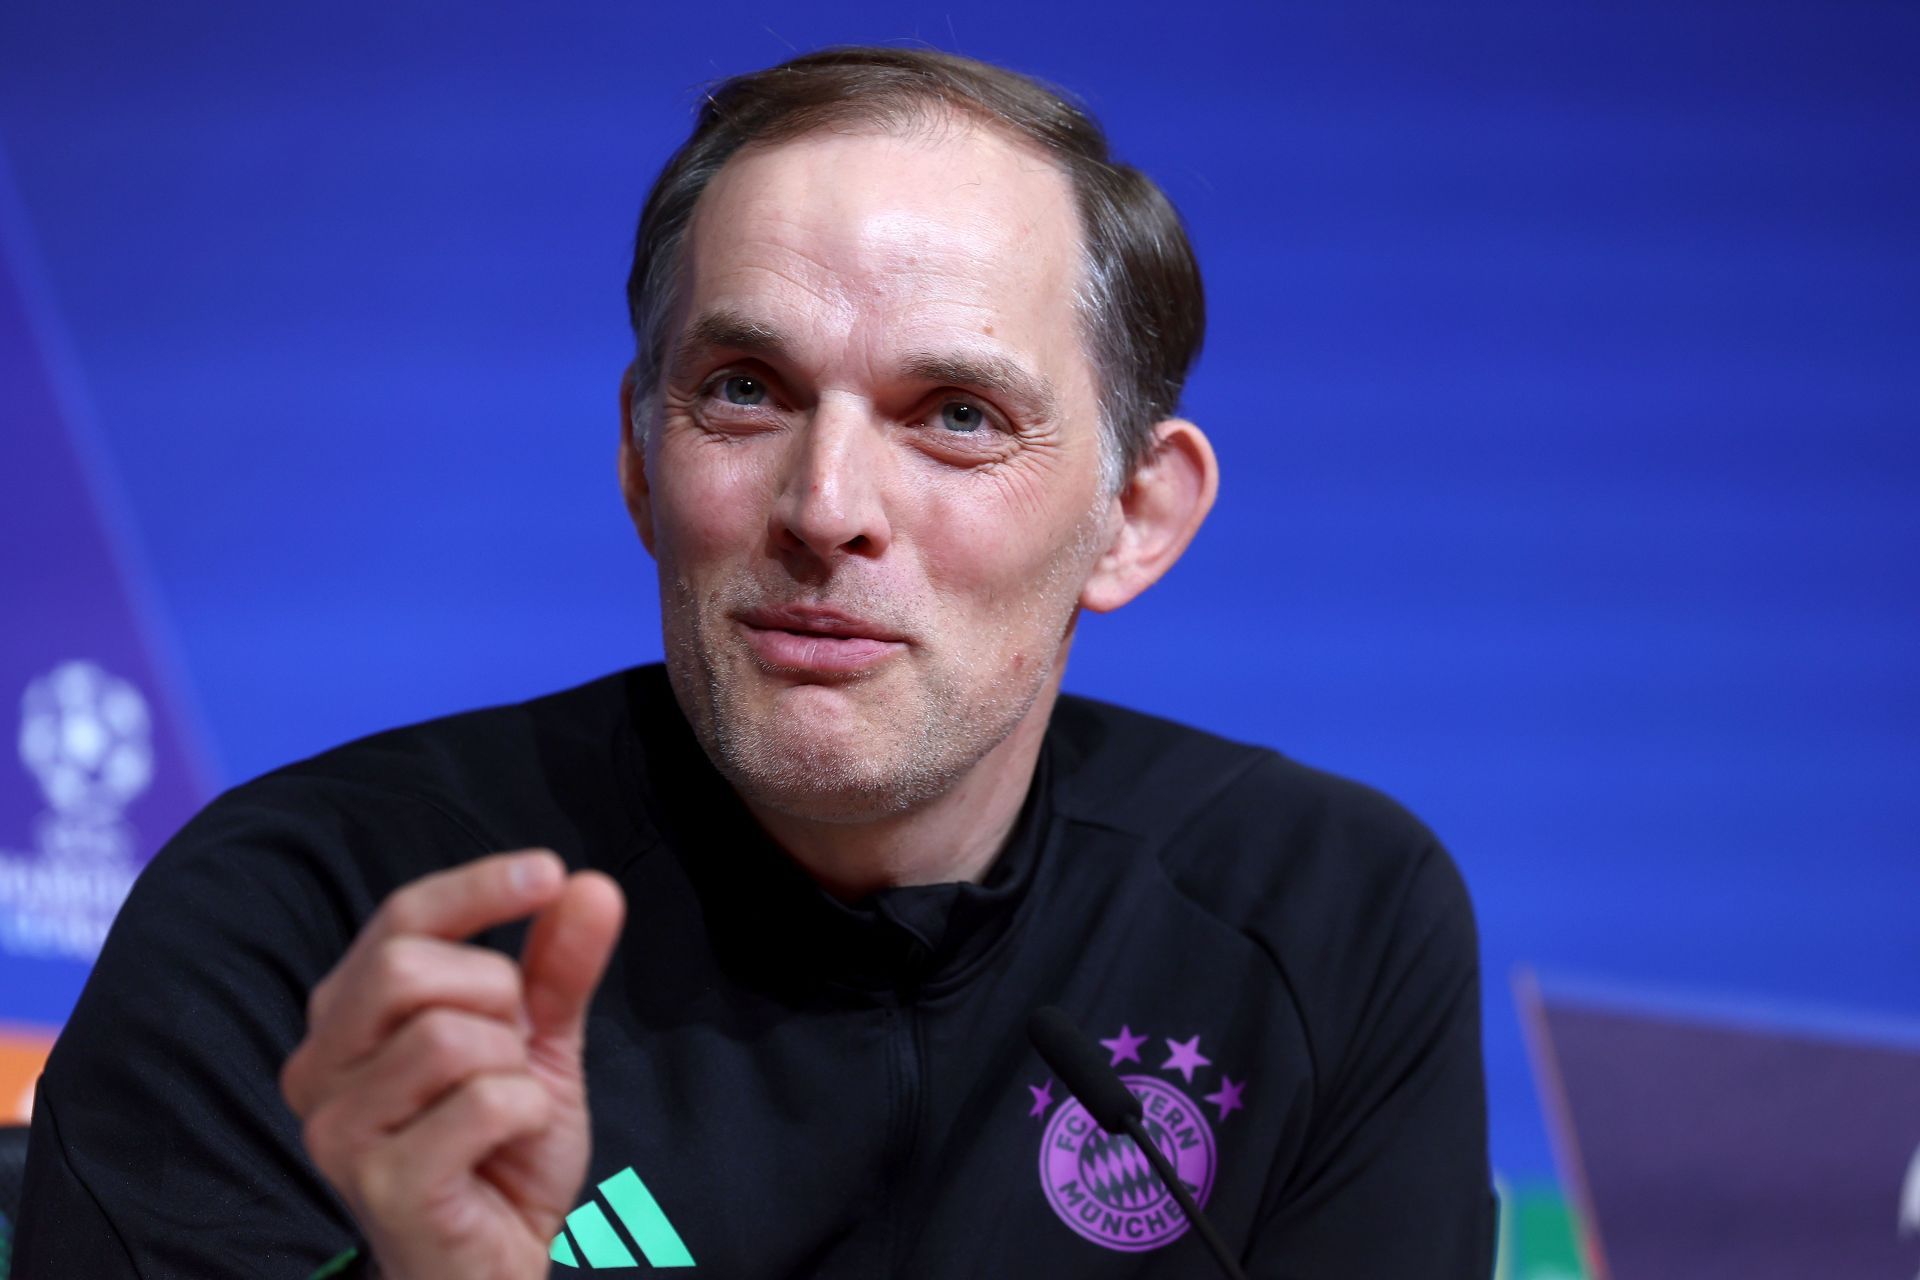 Thomas Tuchel is the favorite to take over at Manchester United.